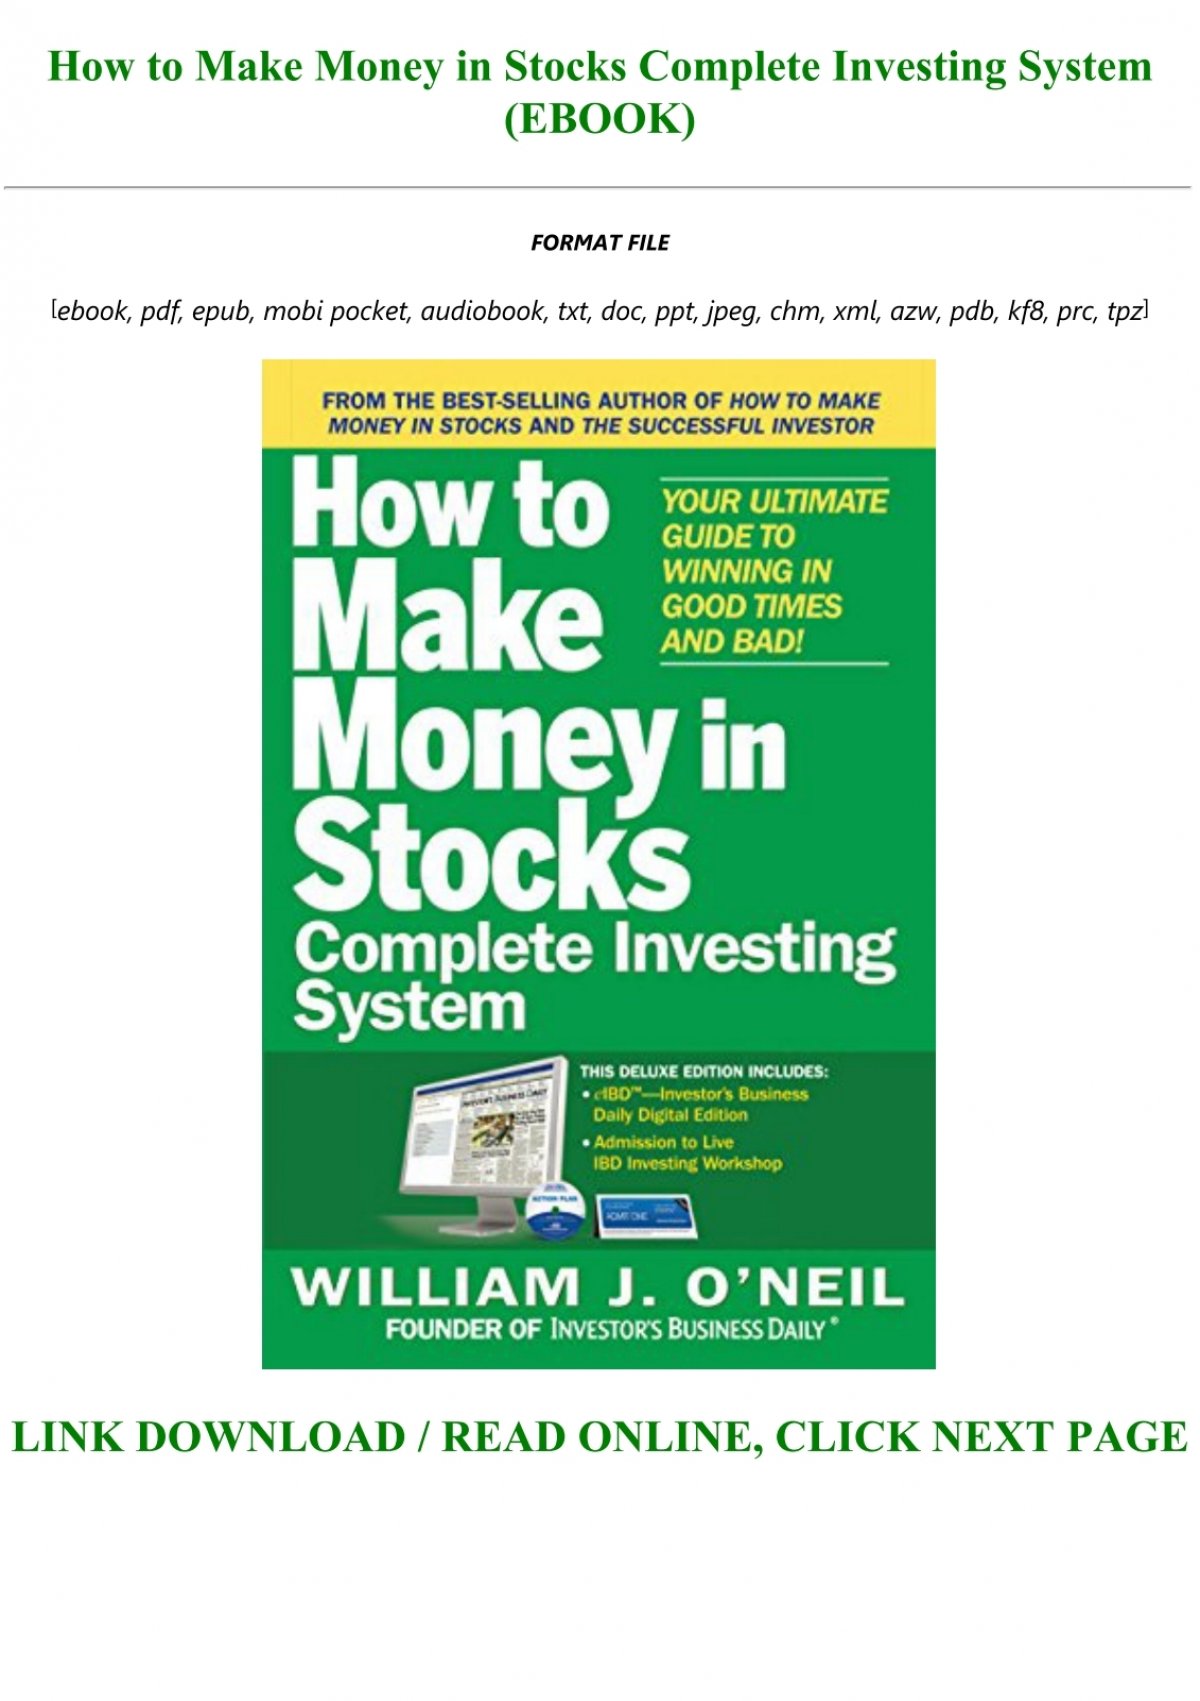 investing in stocks and front load - Money|Stocks|Stock|System|Book|Market|Trading|Books|Guide|Times|Day|Der|Download|Investors|Edition|Investor|Description|Pdf|Format|Epub|O'neil|Die|Strategies|Strategy|Mit|Investing|Dummies|Risk|Gains|Business|Man|Investment|Years|World|Wie|Action|Charts|William|Dad|Plan|Good Times|Stock Market|Ultimate Guide|Mobi Format|Full Book|Day Trading|National Bestseller|Successful Investing|Rich Dad|Seven-Step Process|Maximizing Gains|Major Study|American Association|Individual Investors|Mutual Funds|Book Description|Download Book Description|Handbuch Des|Stock Market Winners|12-Year Study|Leading Investment Strategies|Top-Performing Strategy|System-You Get|Easy Steps|Daily Resource|Big Winners|Market Rally|Big Losses|Market Downturn|Canslim Method